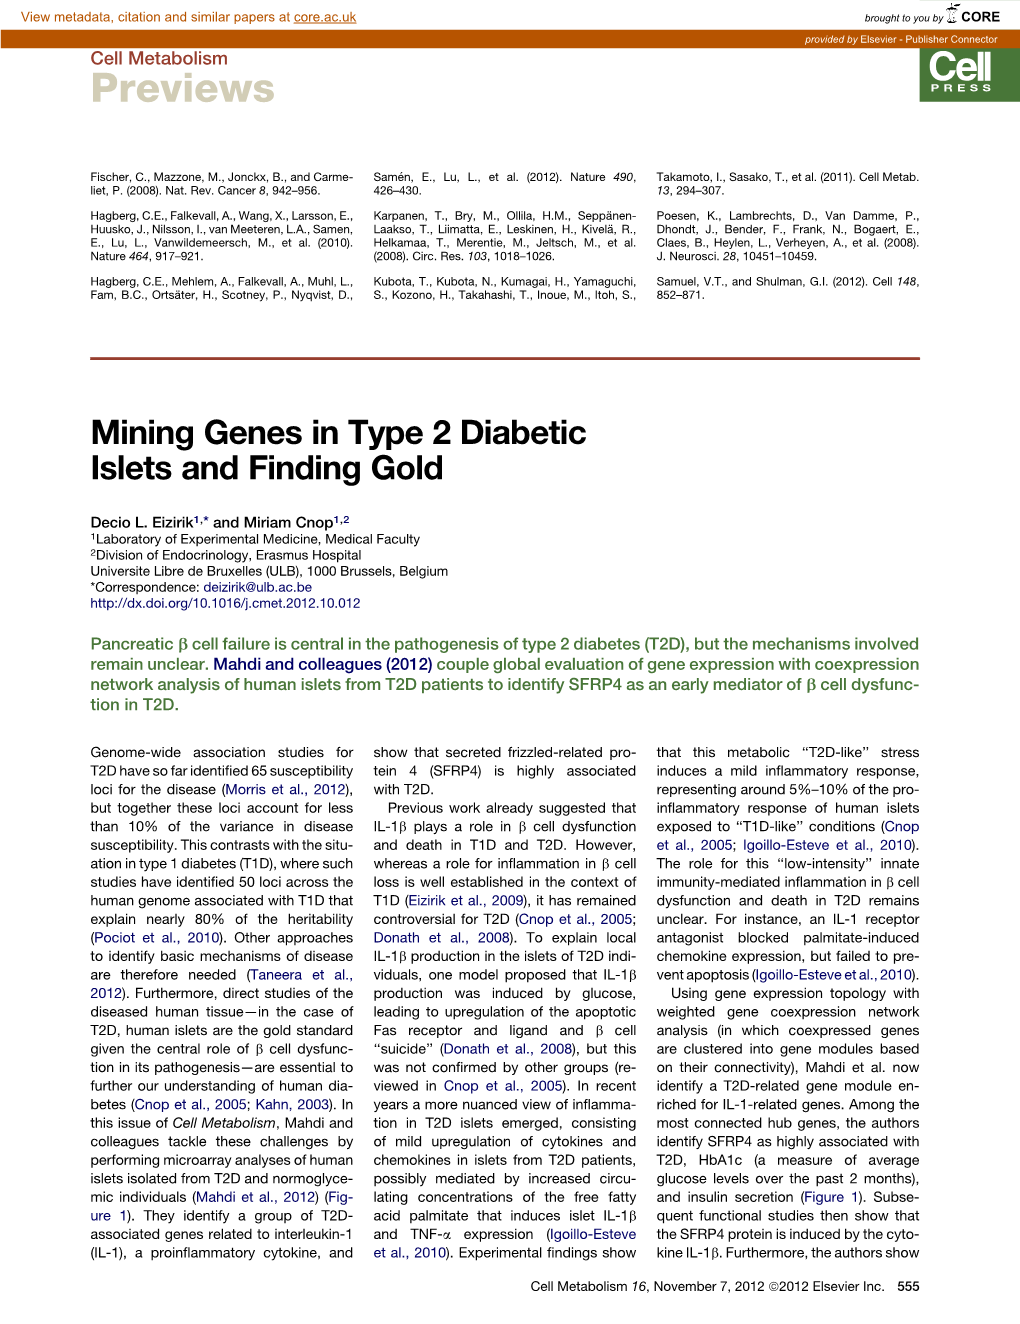 Mining Genes in Type 2 Diabetic Islets and Finding Gold